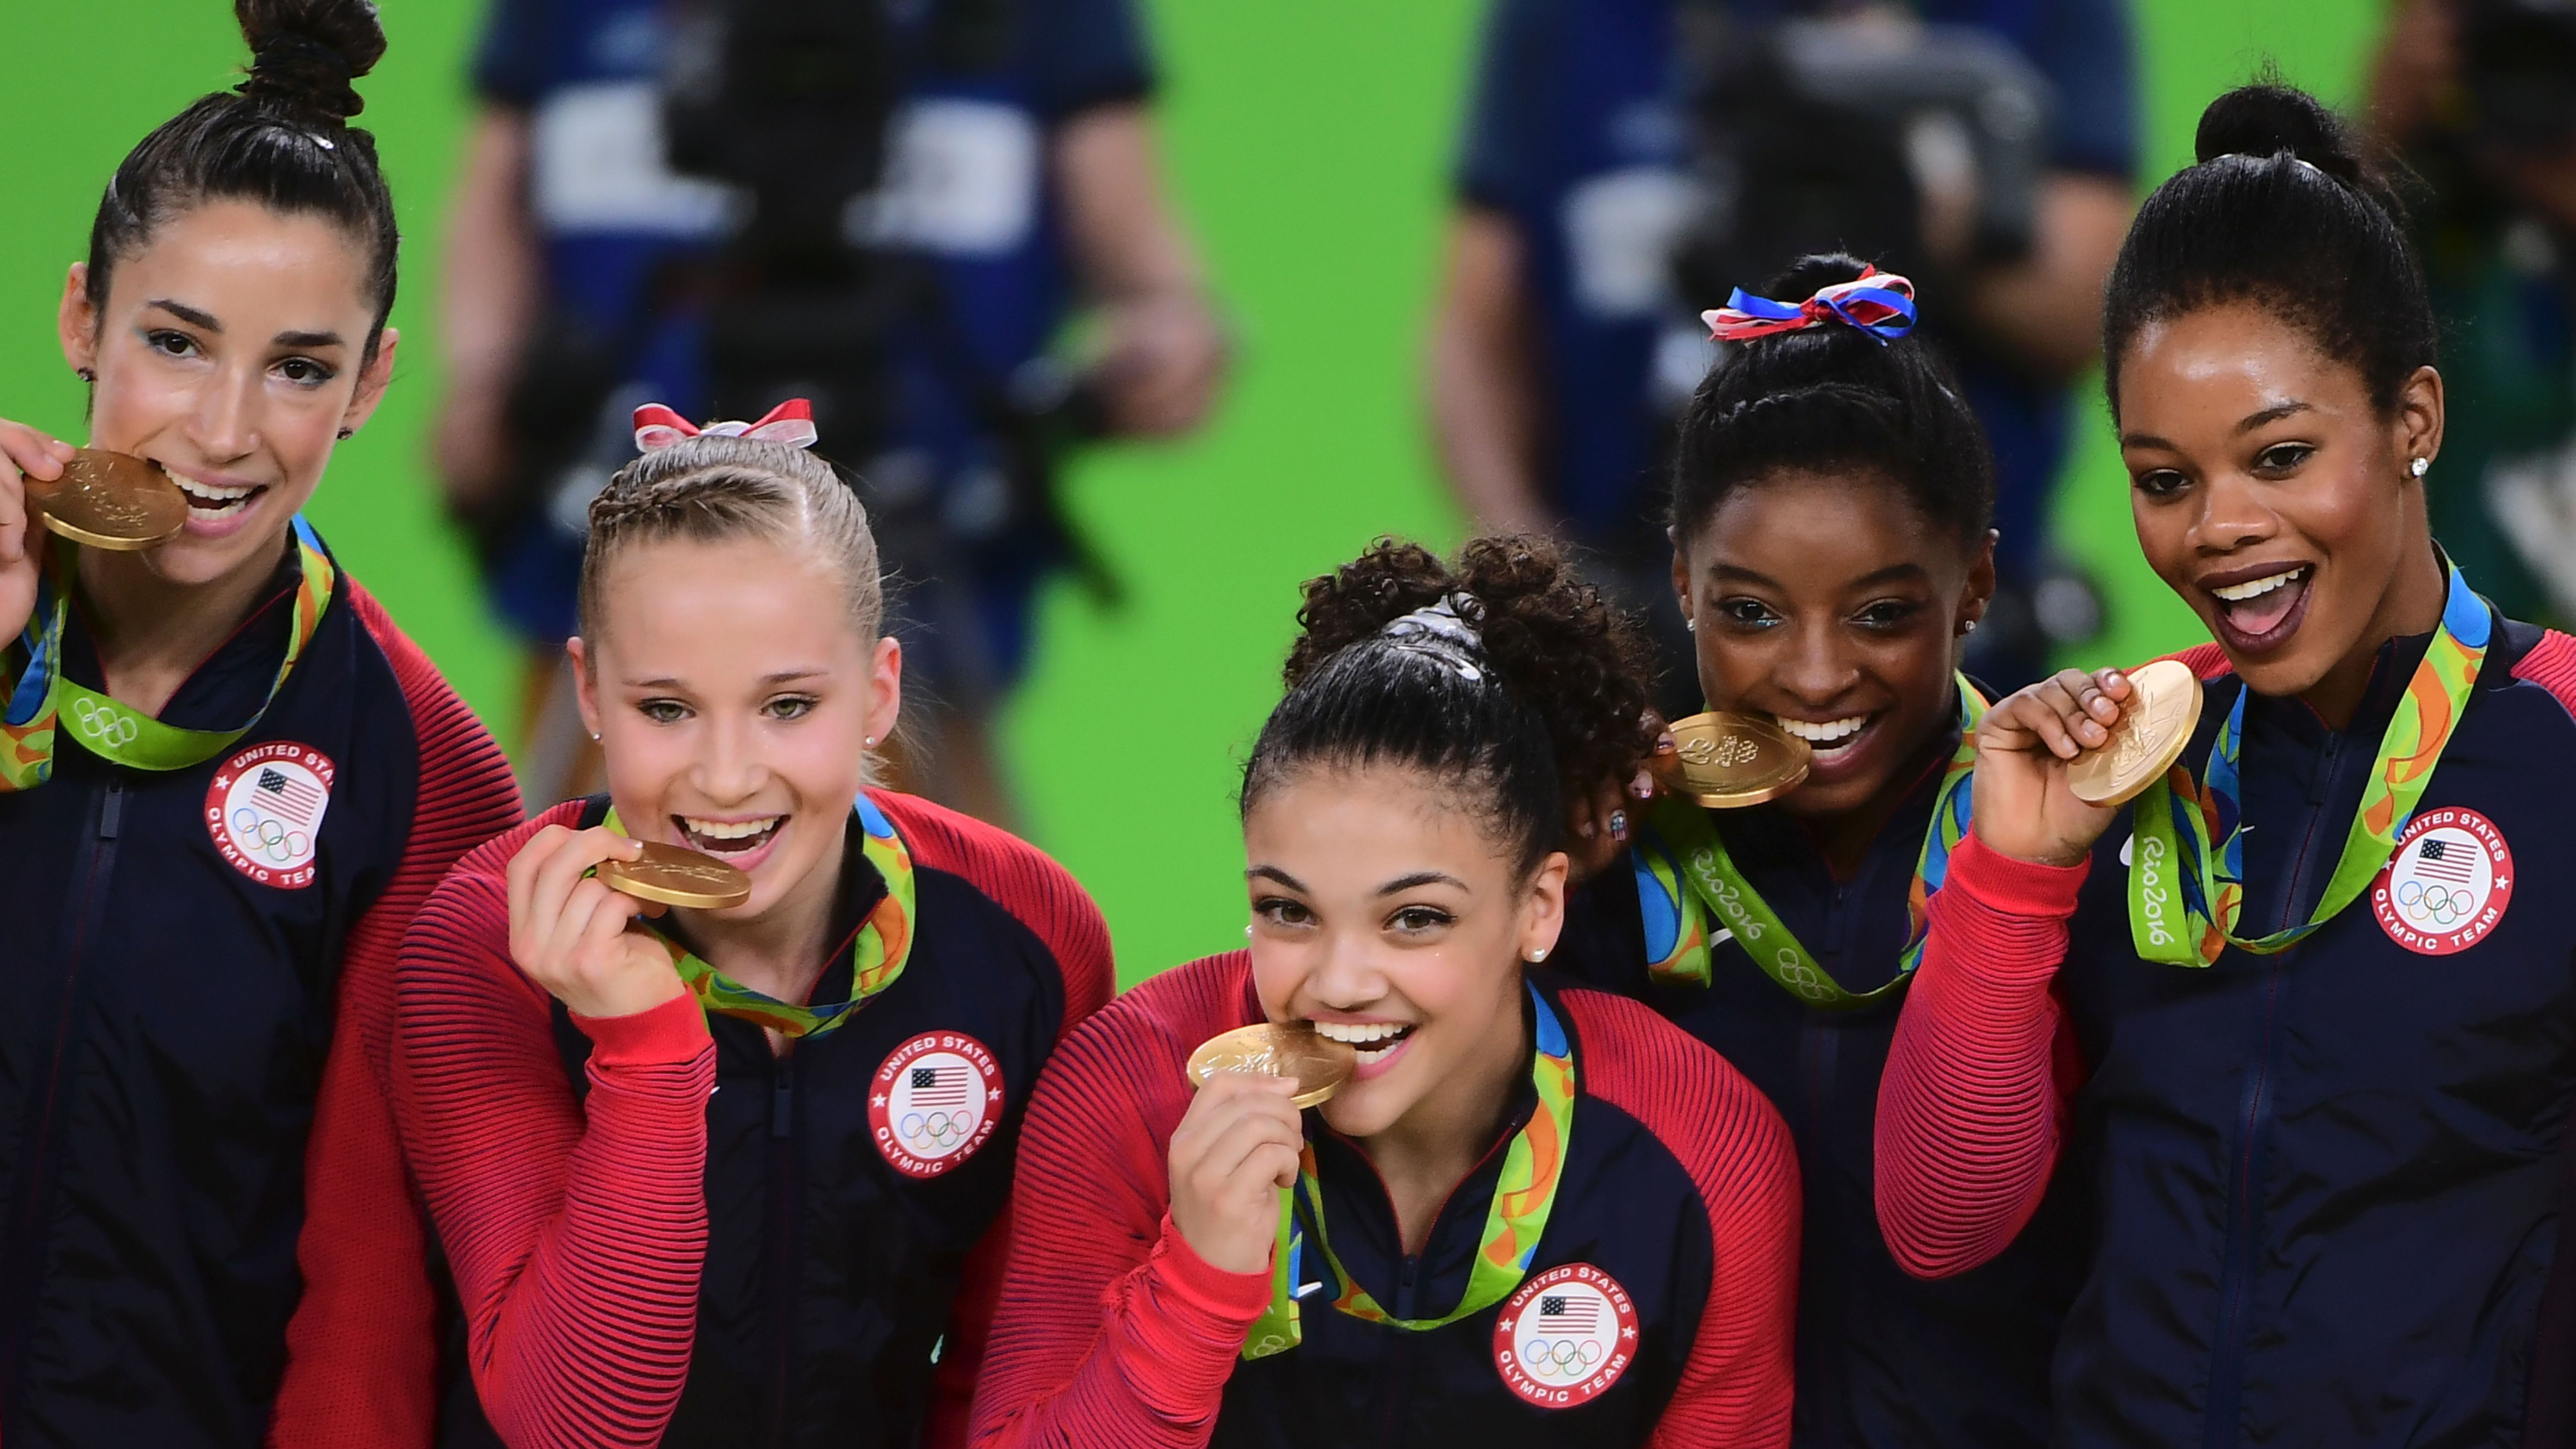 US Women's Gymnastics Team Wins Gold Medal at 2016 Rio Olympics See